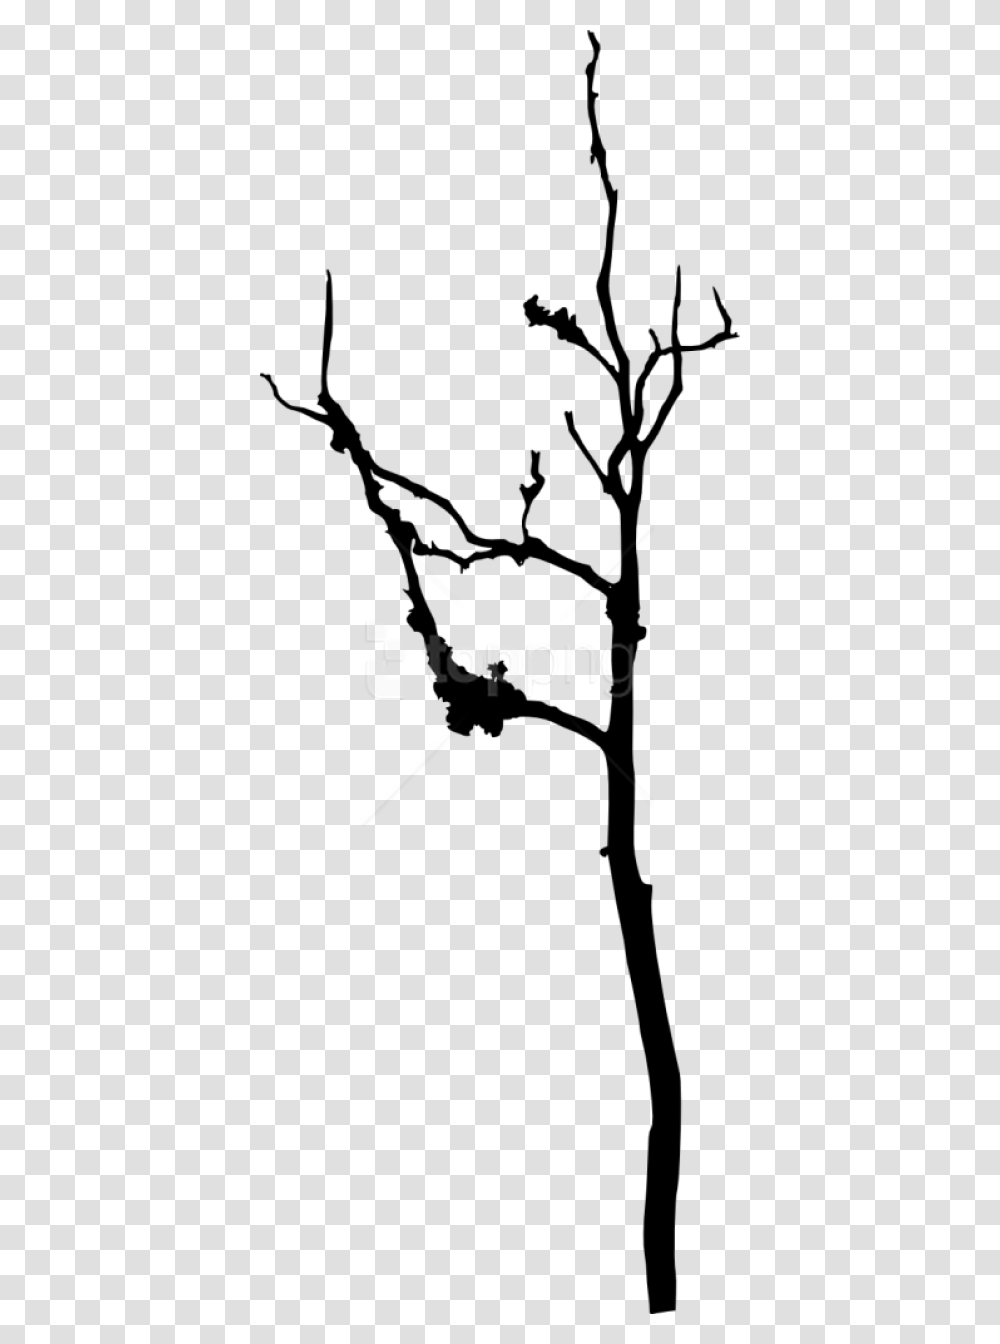 Free Bare Tree Silhouette Images Silhouette, Bow, Plant, Stencil Transparent Png